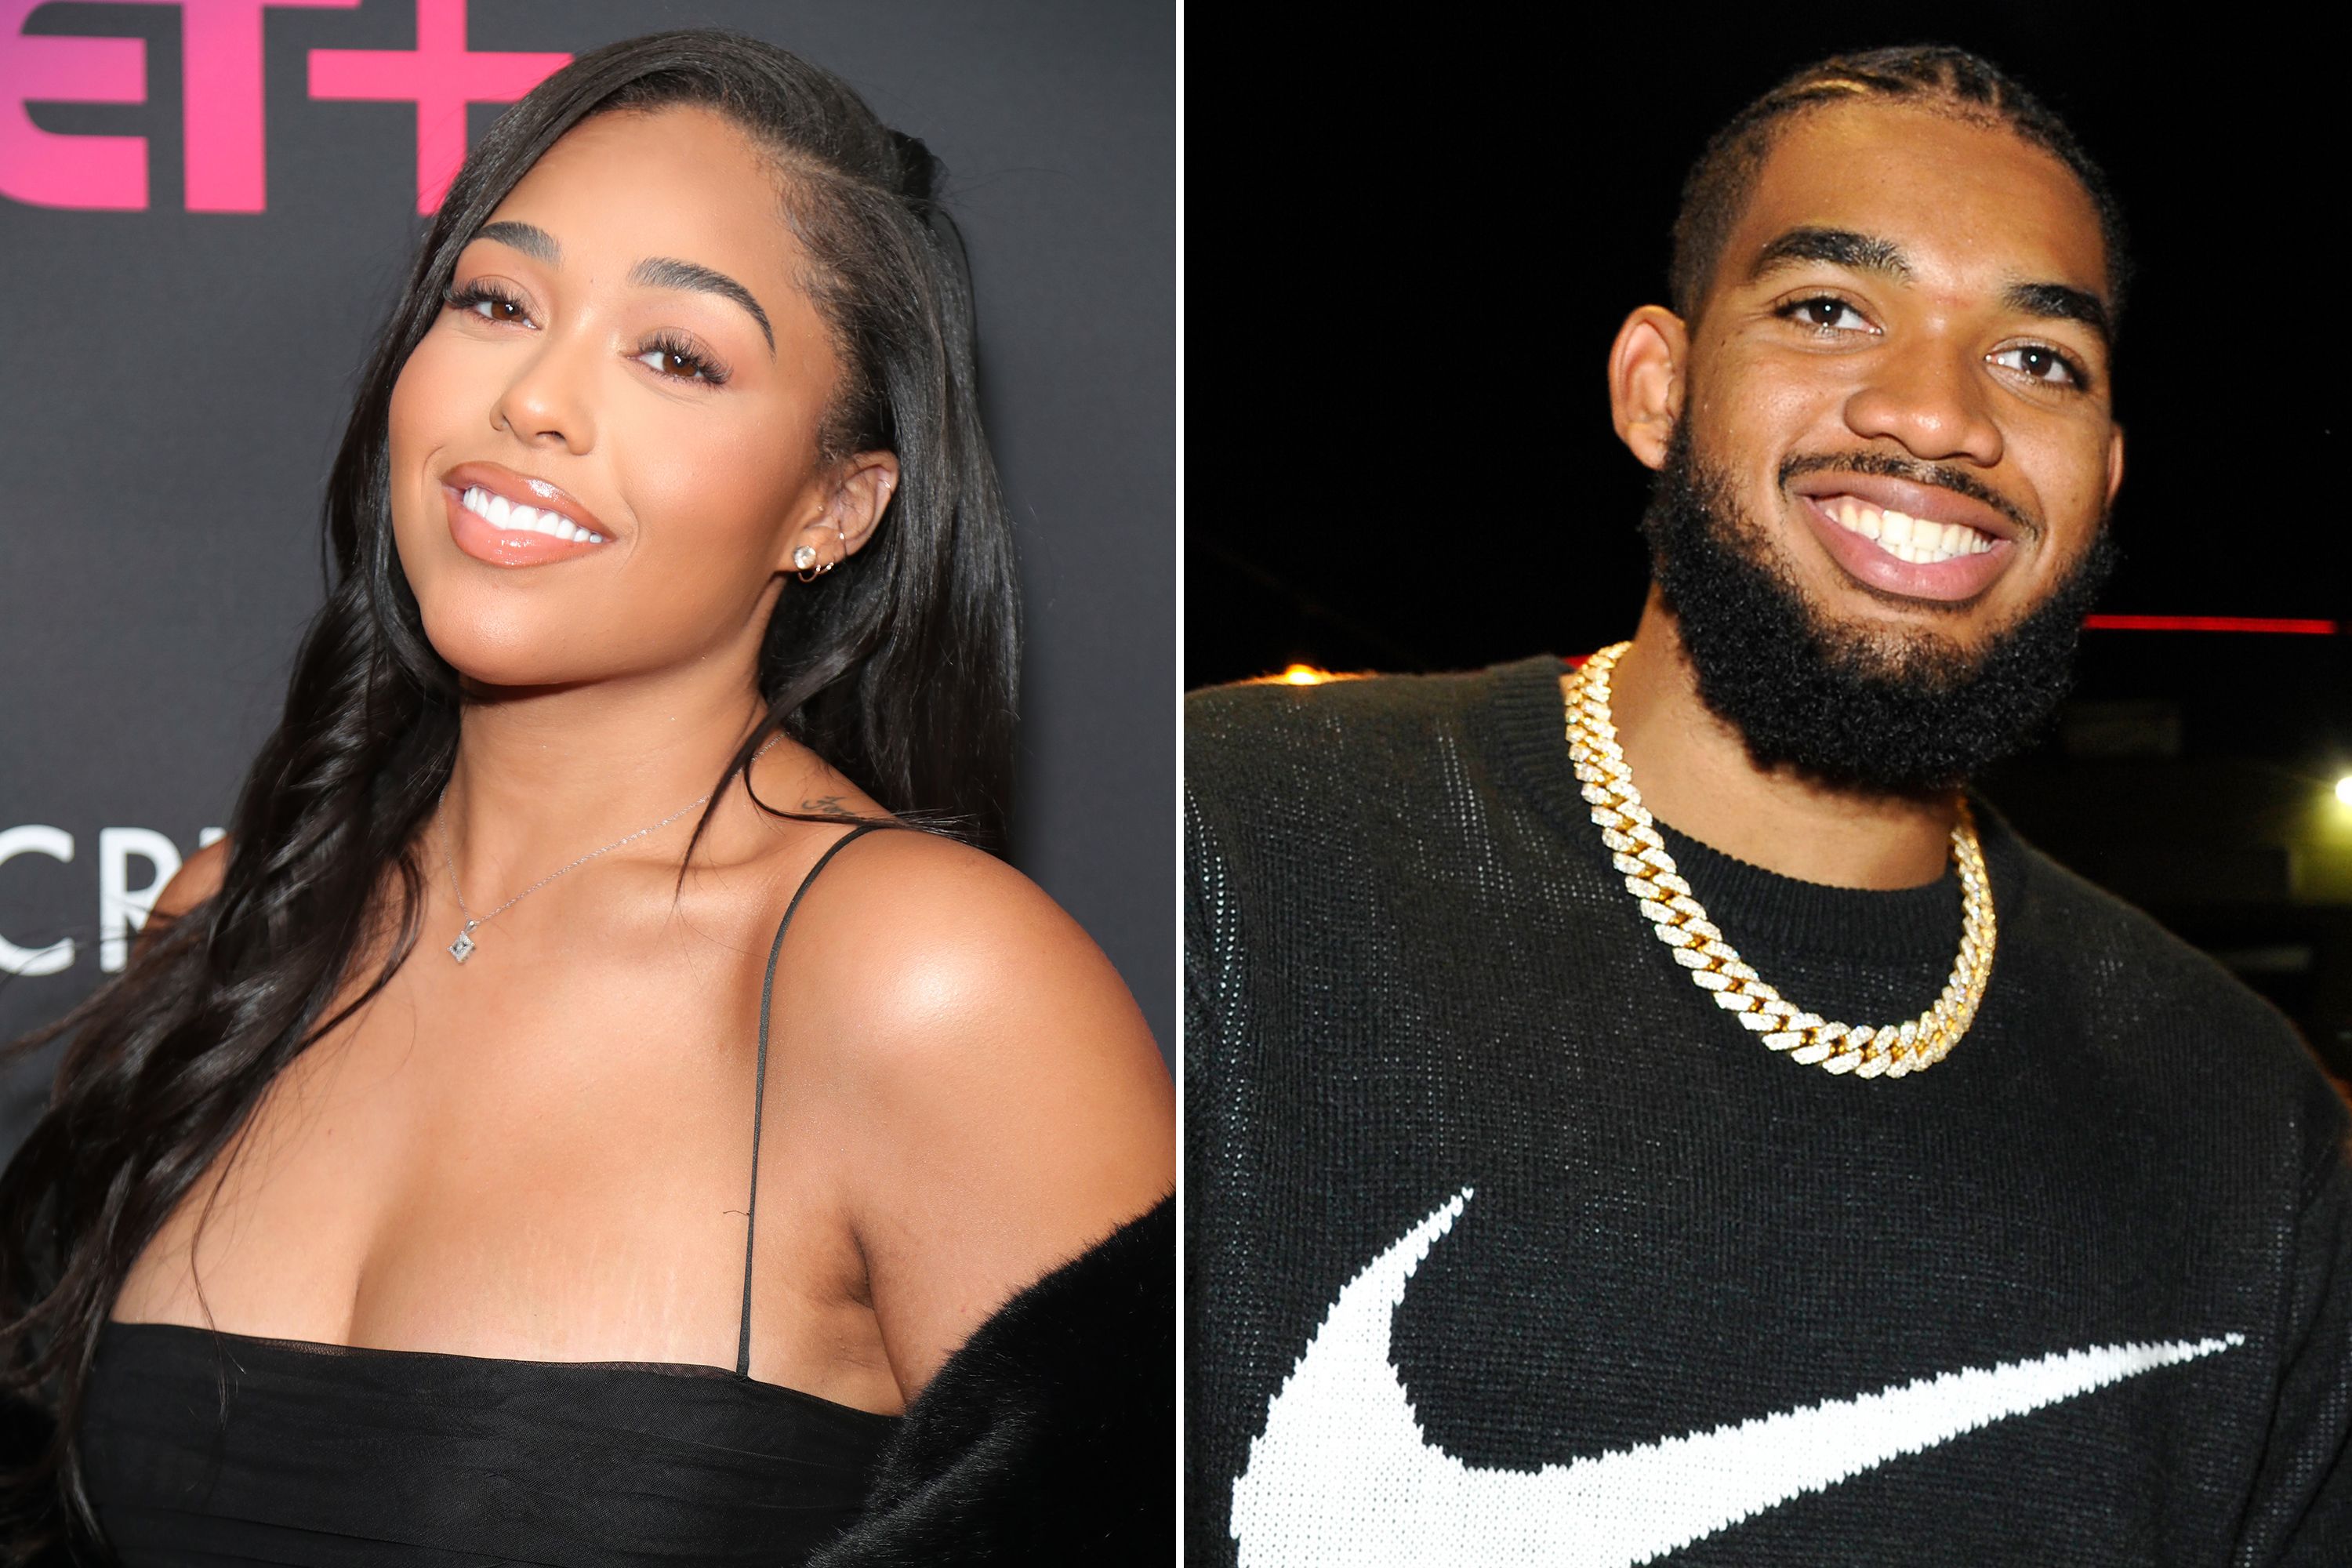 Kylie Jenner's ex-bff Jordyn Woods asks for prayers after boyfriend contracts Covid-19